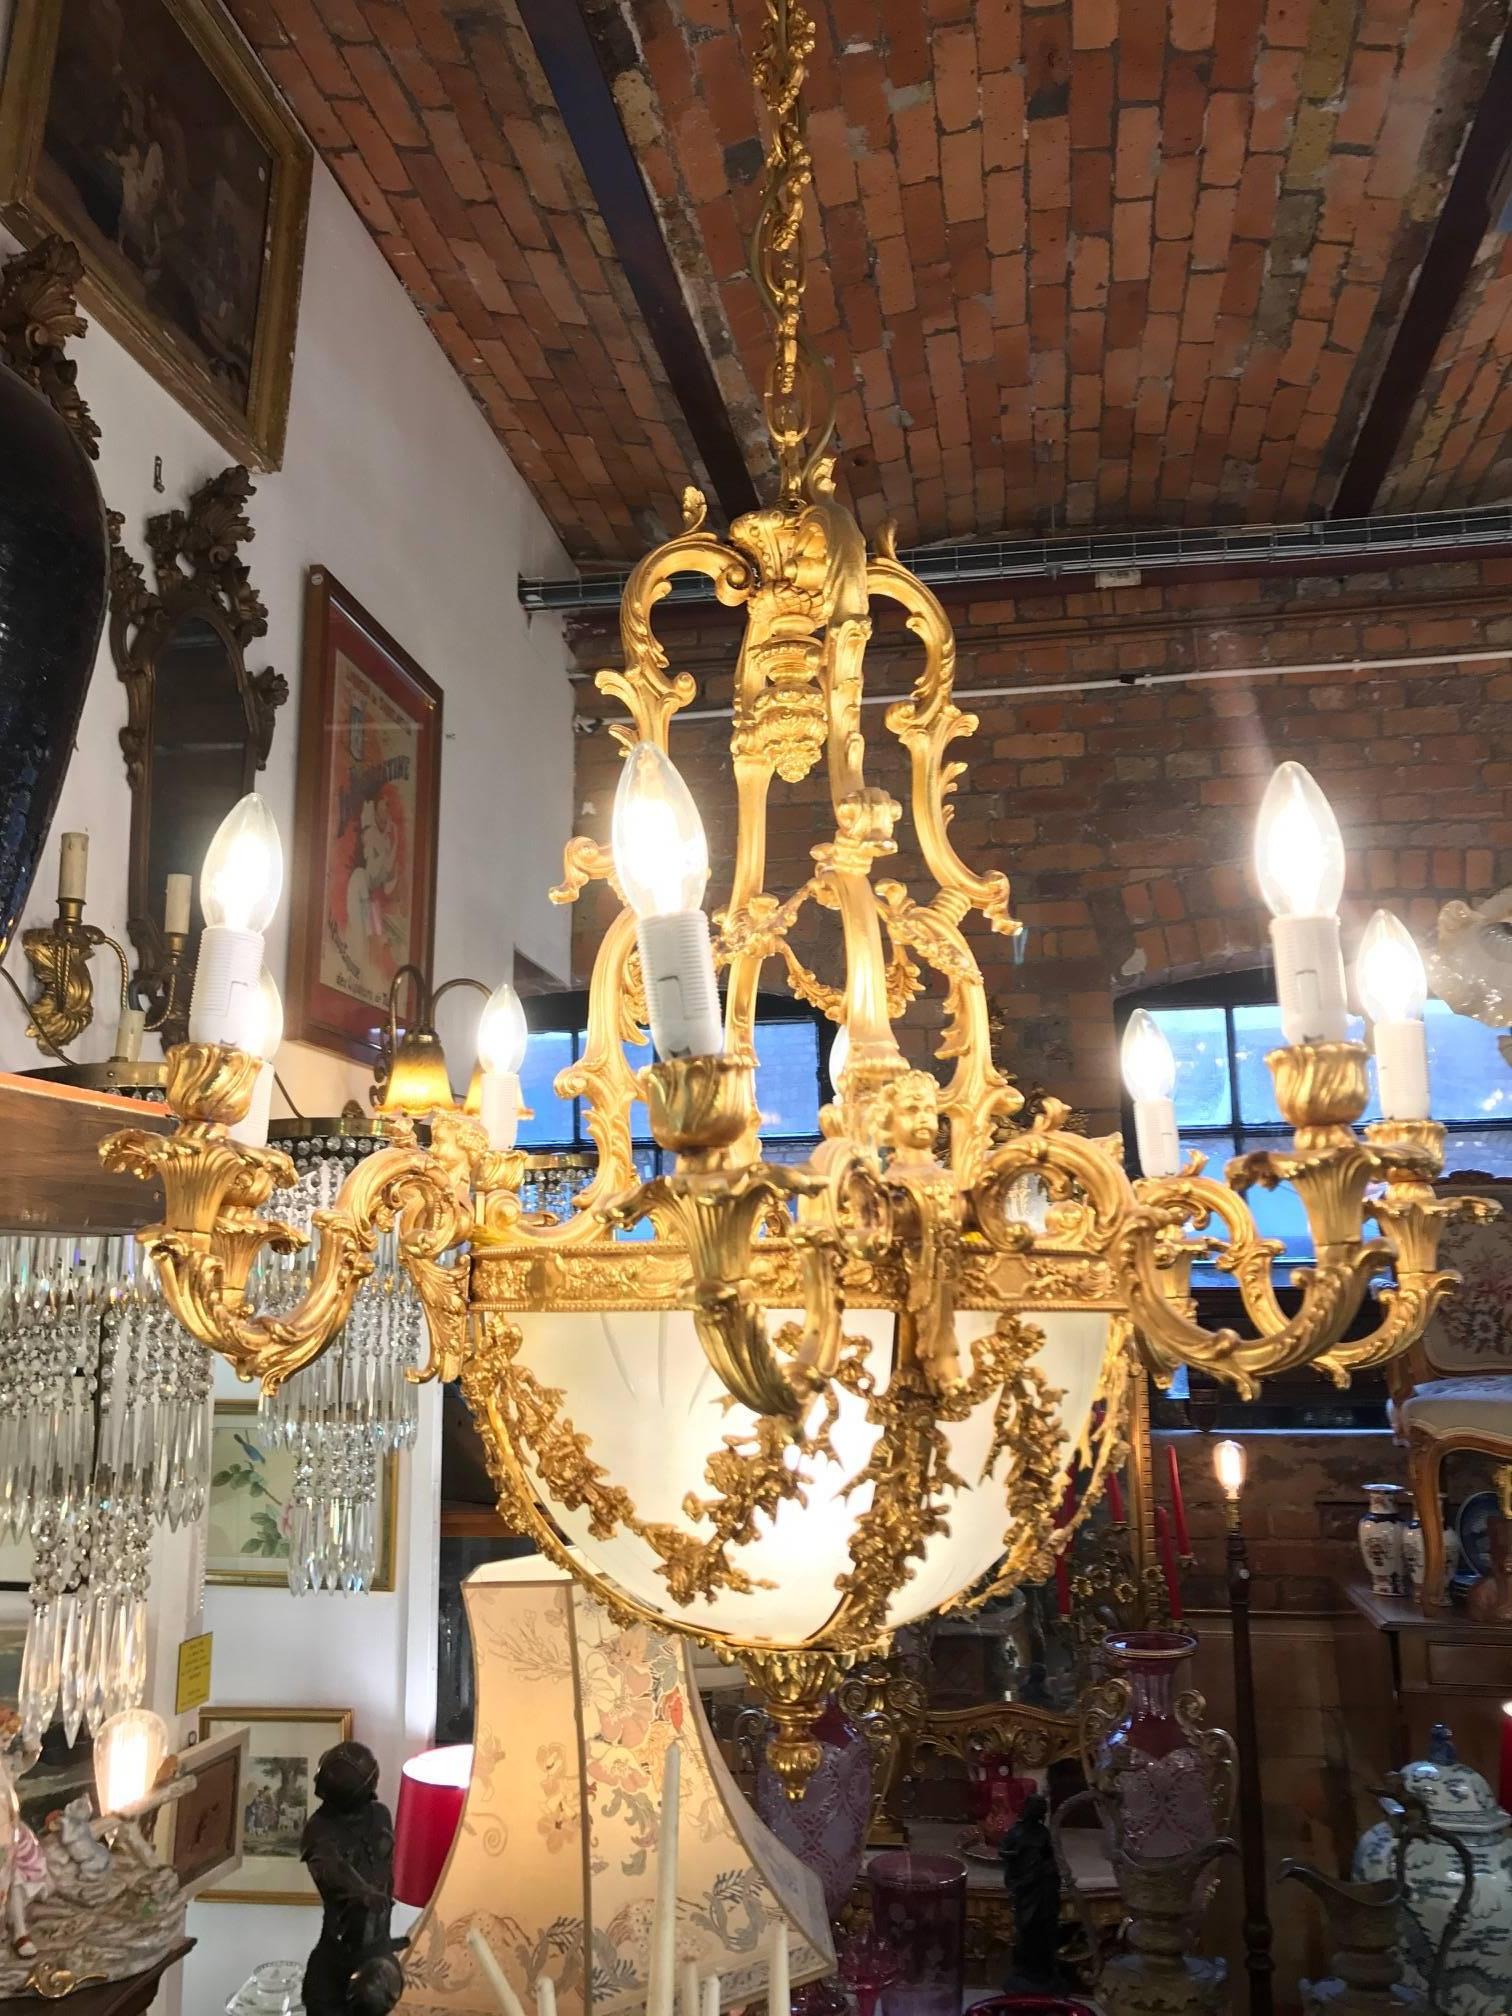 20th century gilt bronze chandelier in Louis XVI style with eight scrolled branches. The arms of the chandelier coil out from a frosted, hand cut, oval crystal bowel base. Decorated with a gilt bronze frieze of Greek waves, cherub faces, leaves and